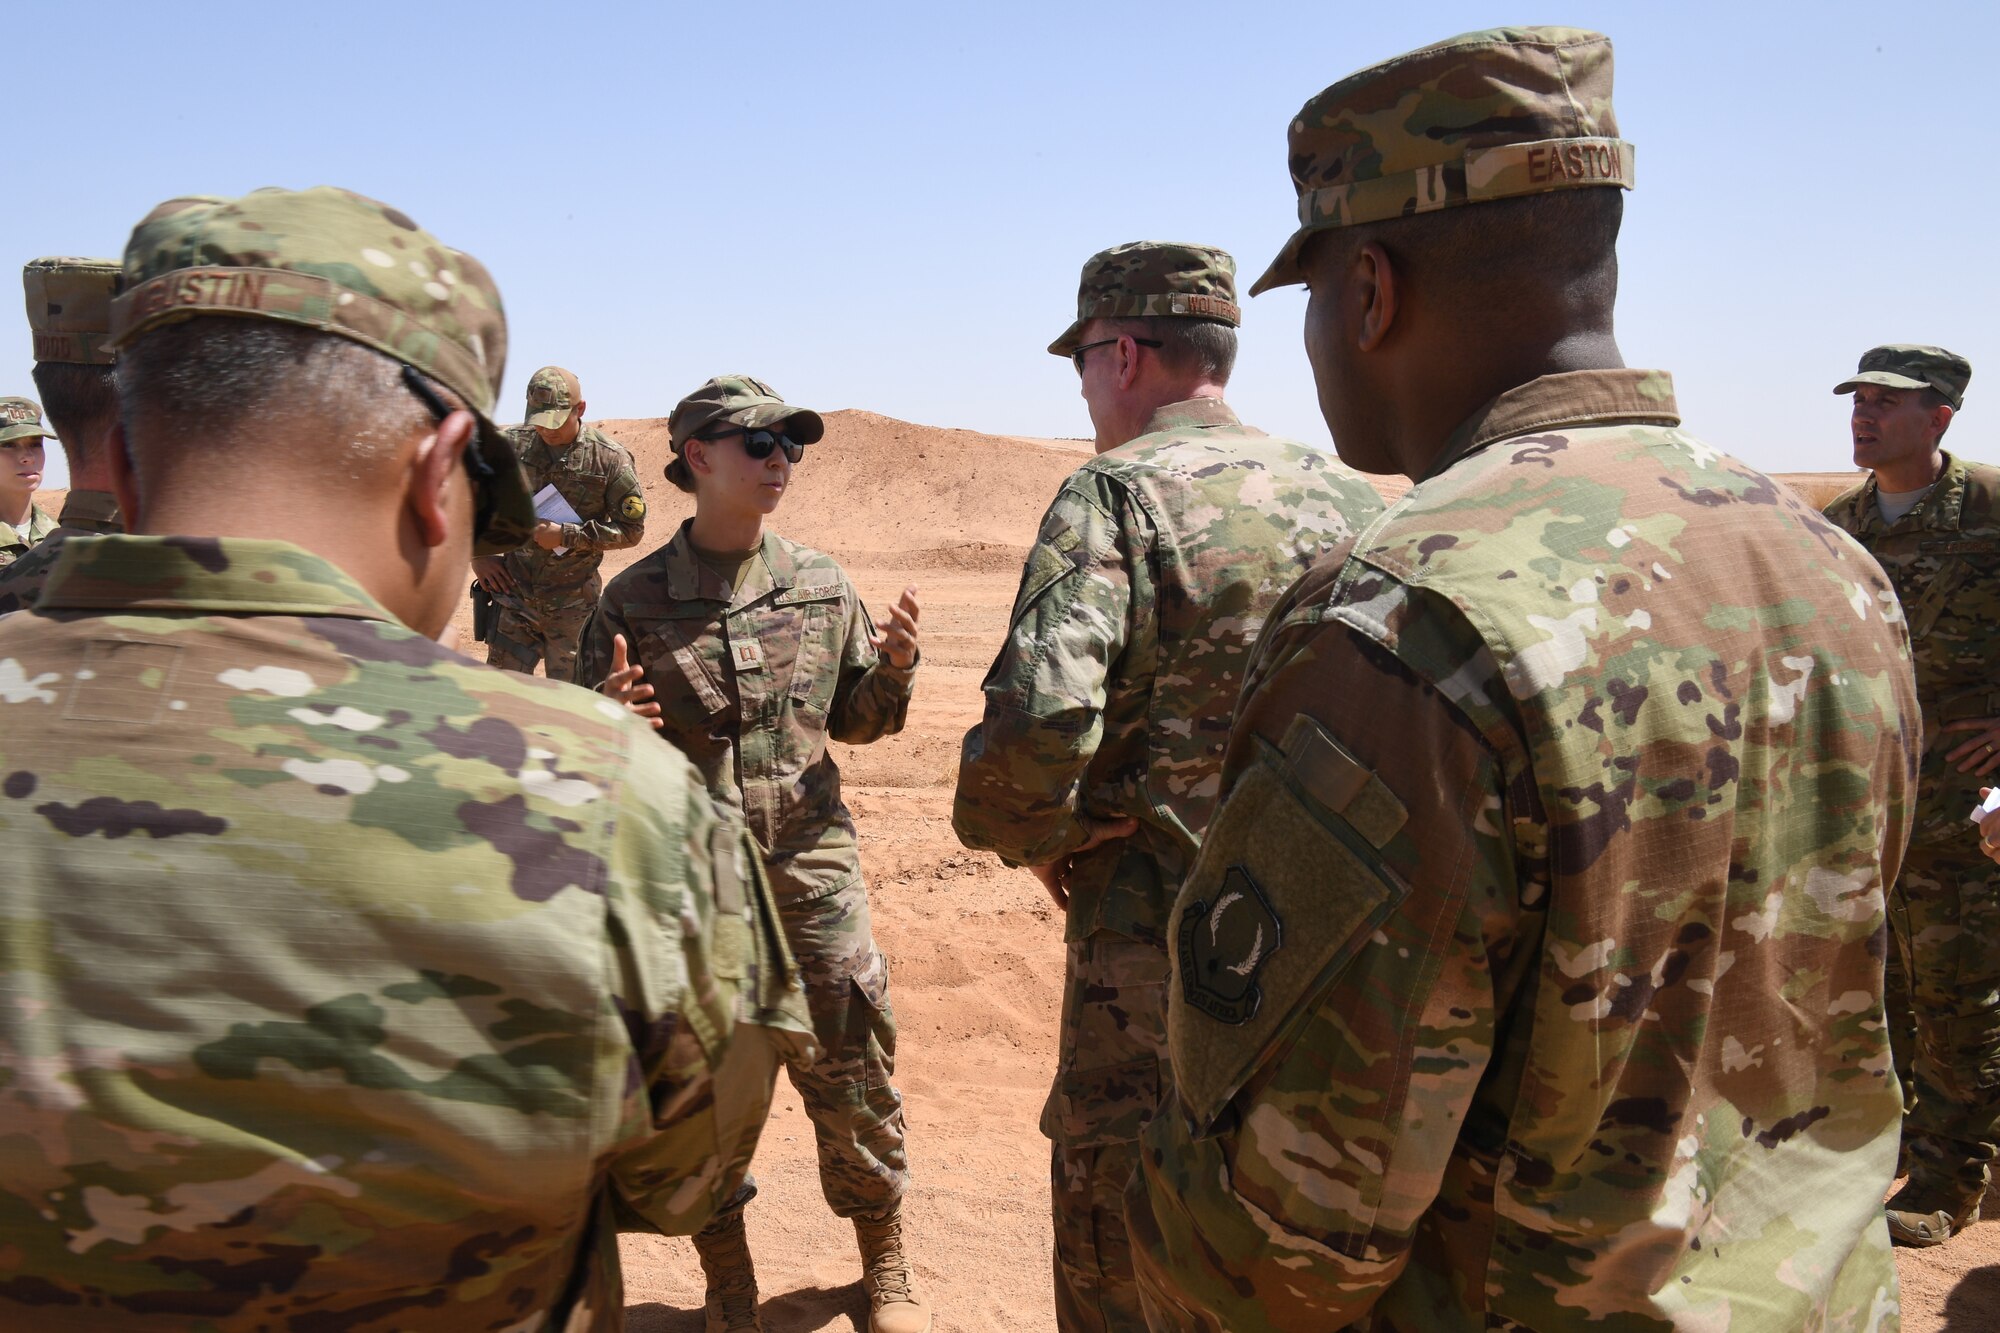 U.S. Air Force Gen. Tod D. Wolters, U.S. Air Forces in Europe-Air Forces Africa commander, and leaders from U.S. Air Forces in Europe-Air Forces Africa, 3rd Air Force, and the 435th Air Expeditionary Wing discuss operations at Nigerien Air Base 201, Niger, Oct. 25, 2018. The tour allowed USAFE-AFAFRICA leadership to see progress at the construction sites and base facilities first-hand. (U.S. Air Force photo by Tech. Sgt. Rachelle Coleman)